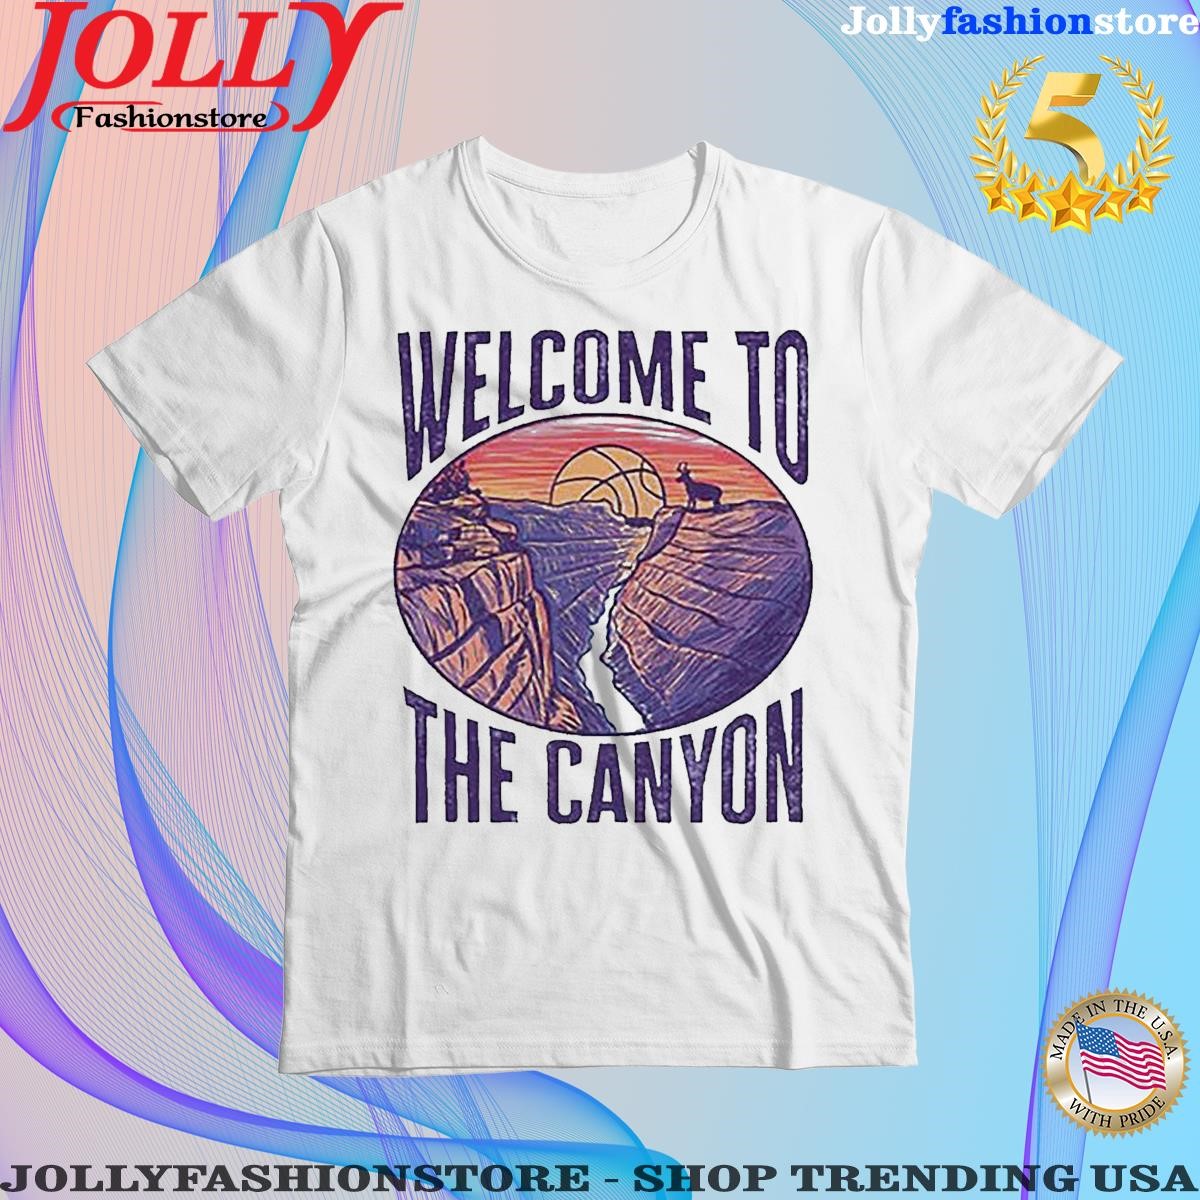 Welcome to the canyon T-shirt